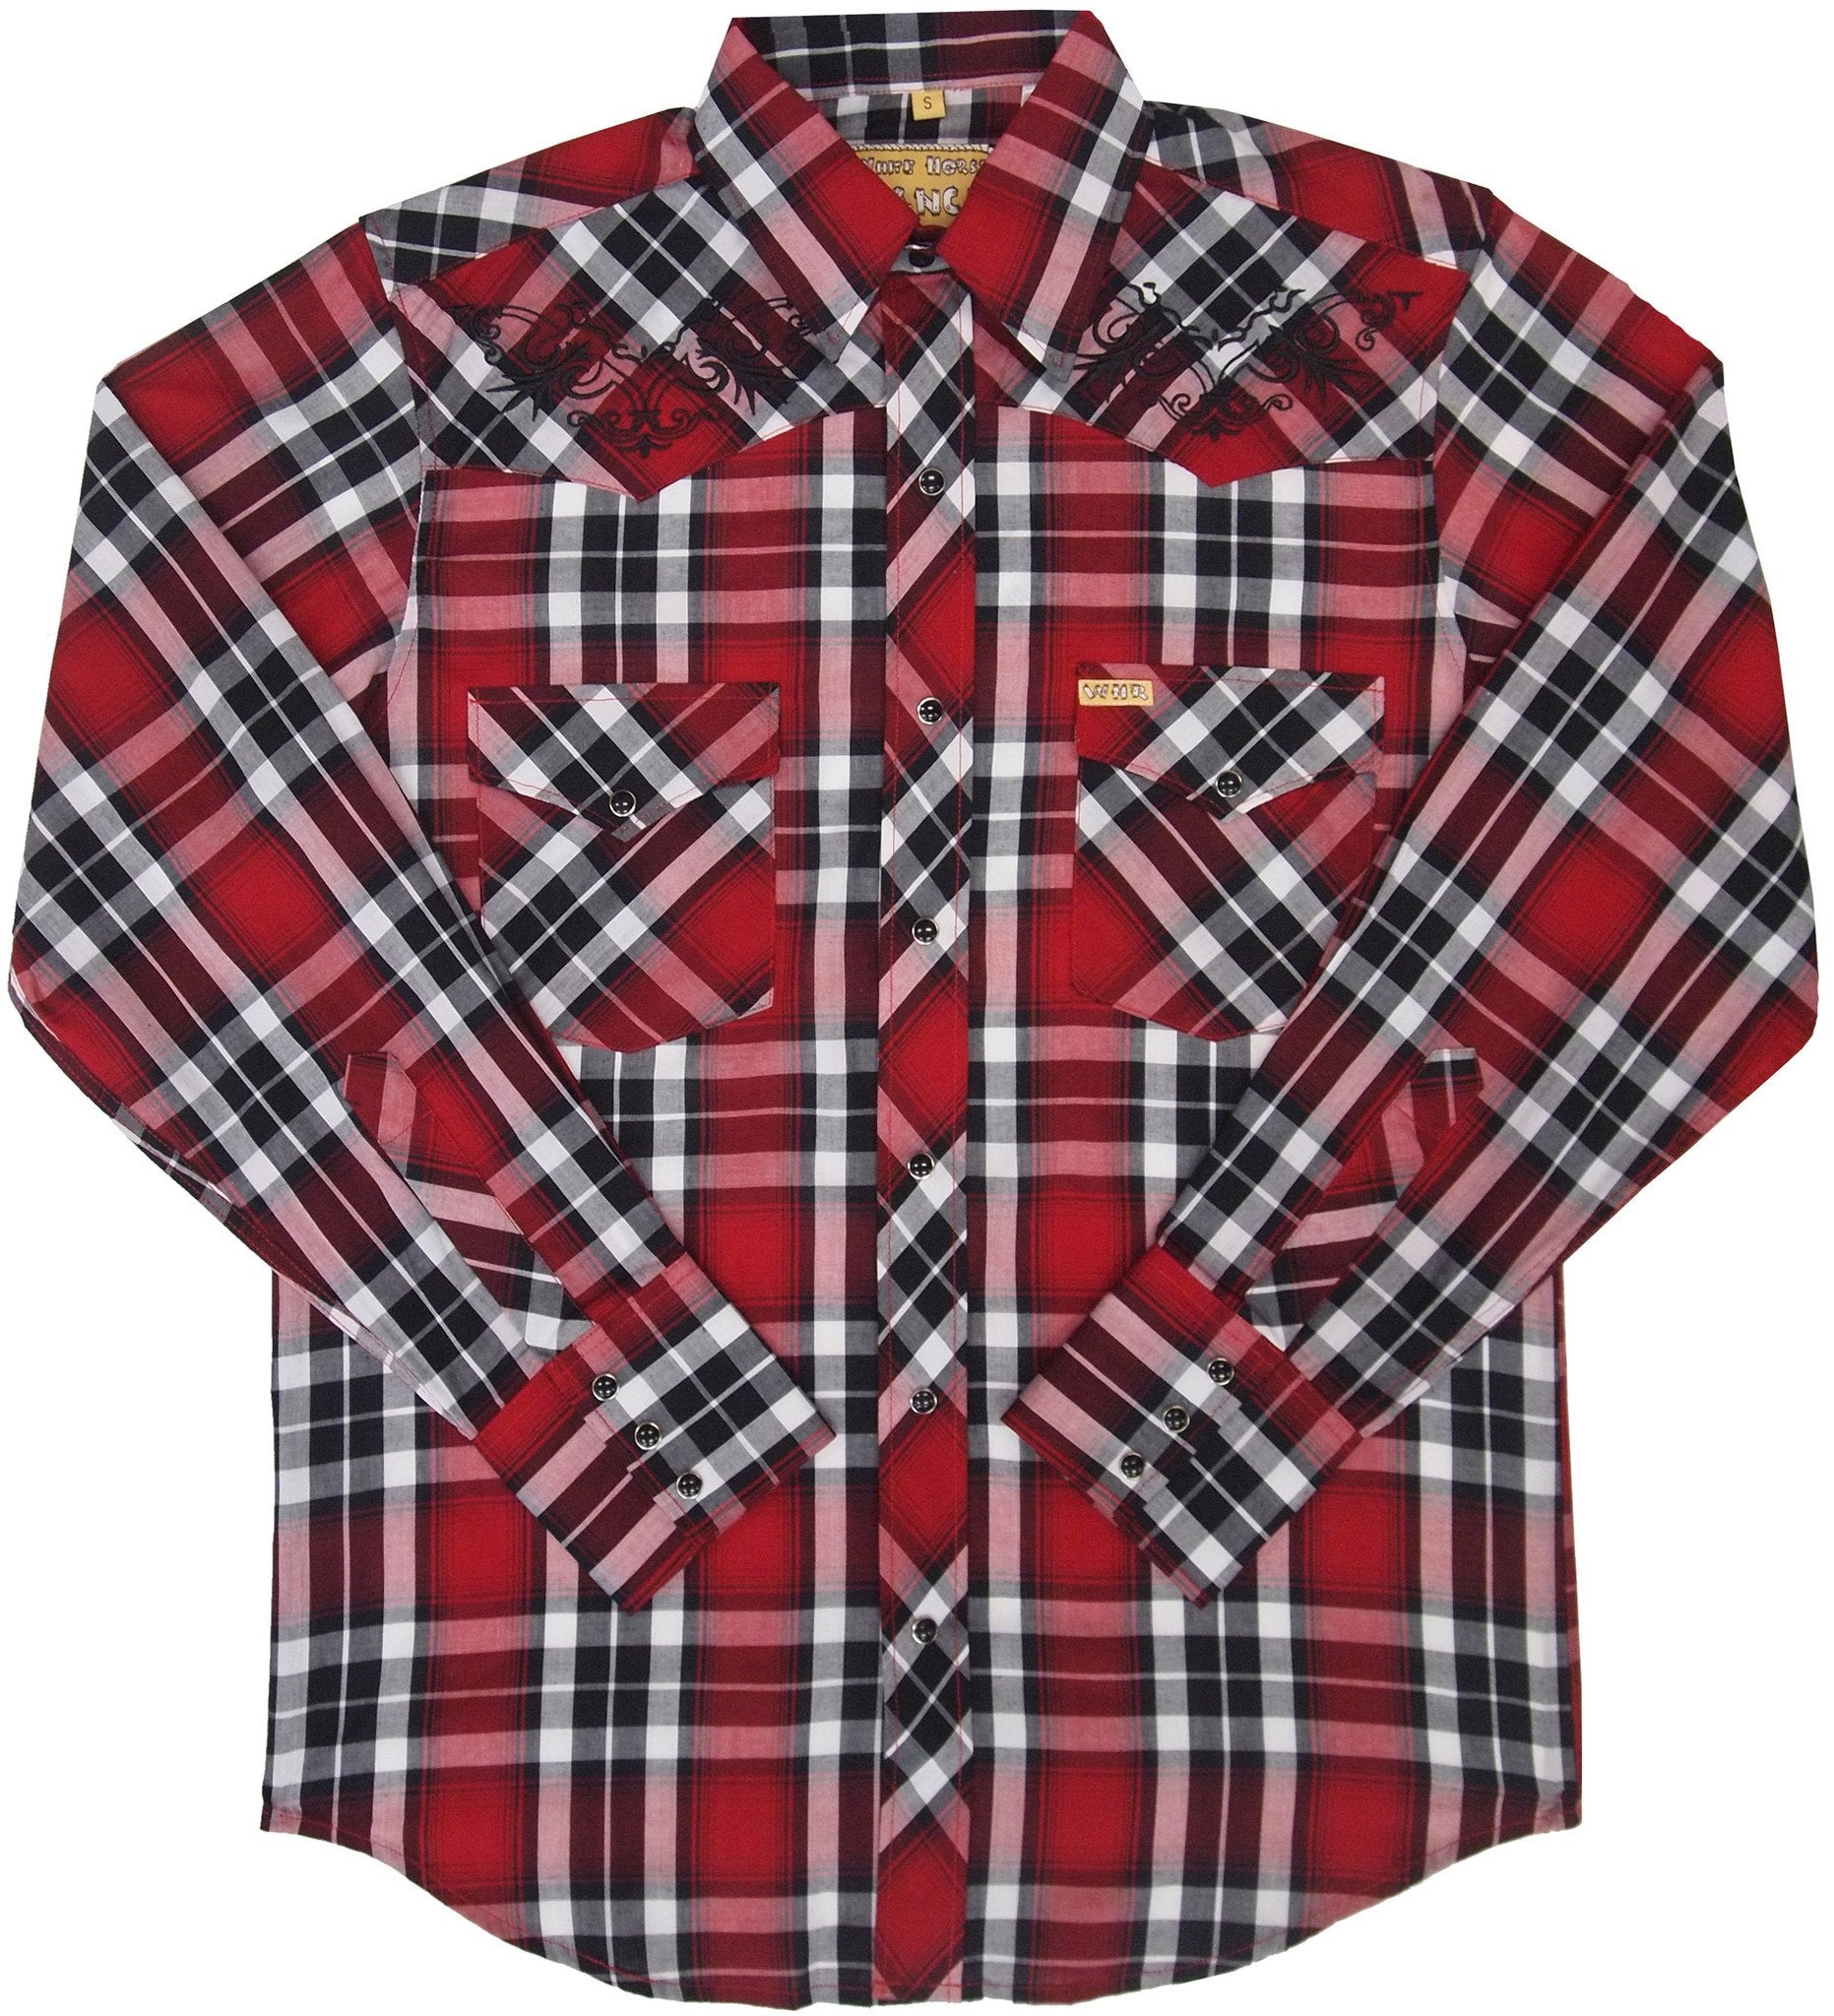 White Horse Apparel Men's Western Embroidered Plaid Shirt